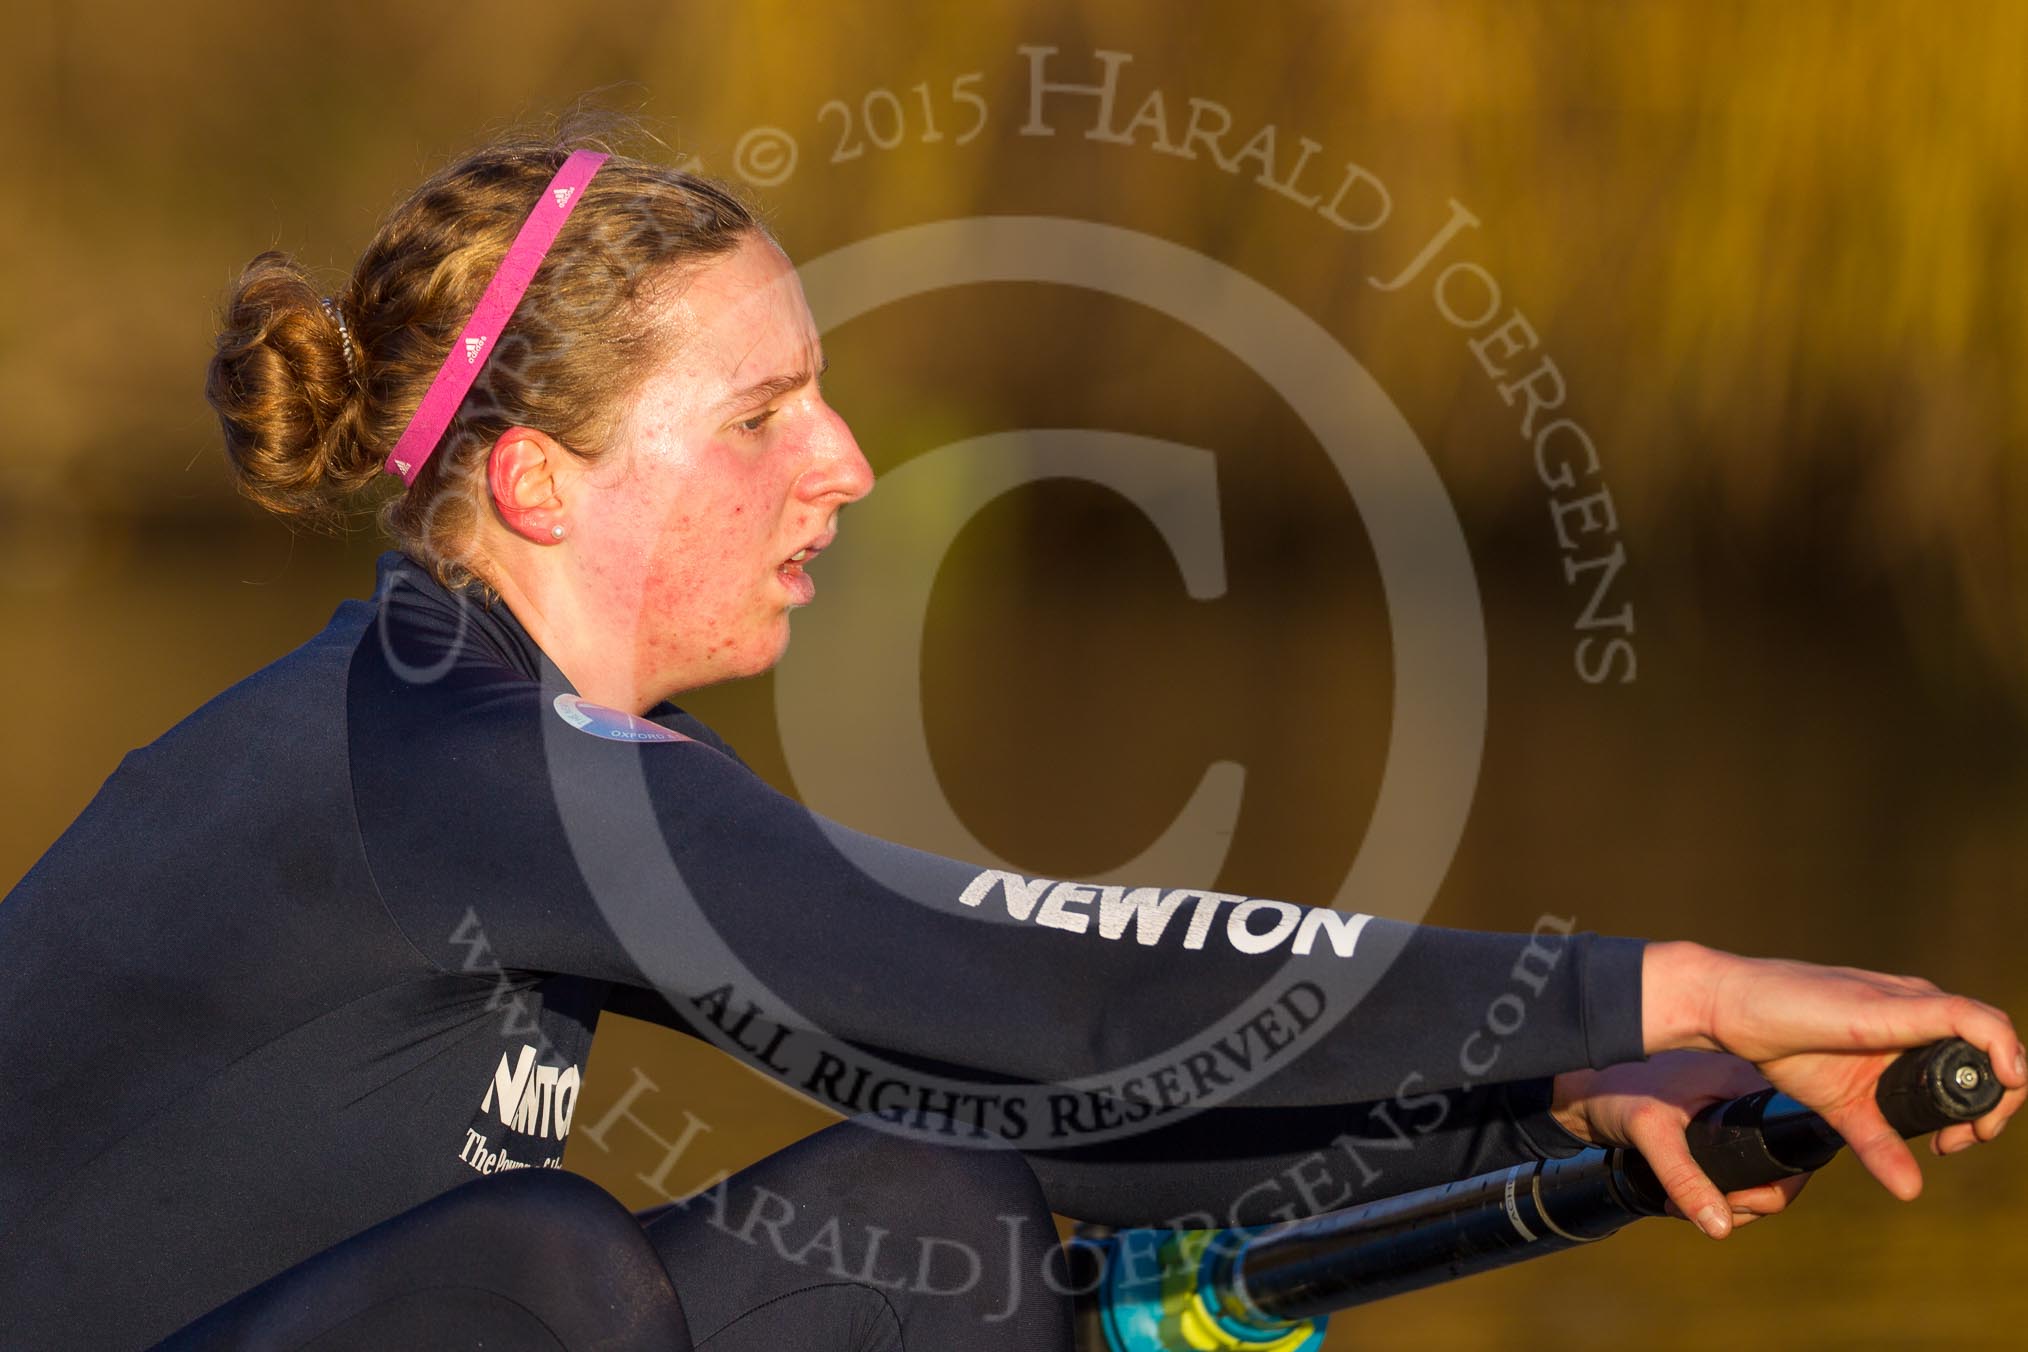 The Boat Race season 2015: OUWBC training Wallingford.

Wallingford,

United Kingdom,
on 04 March 2015 at 16:59, image #236